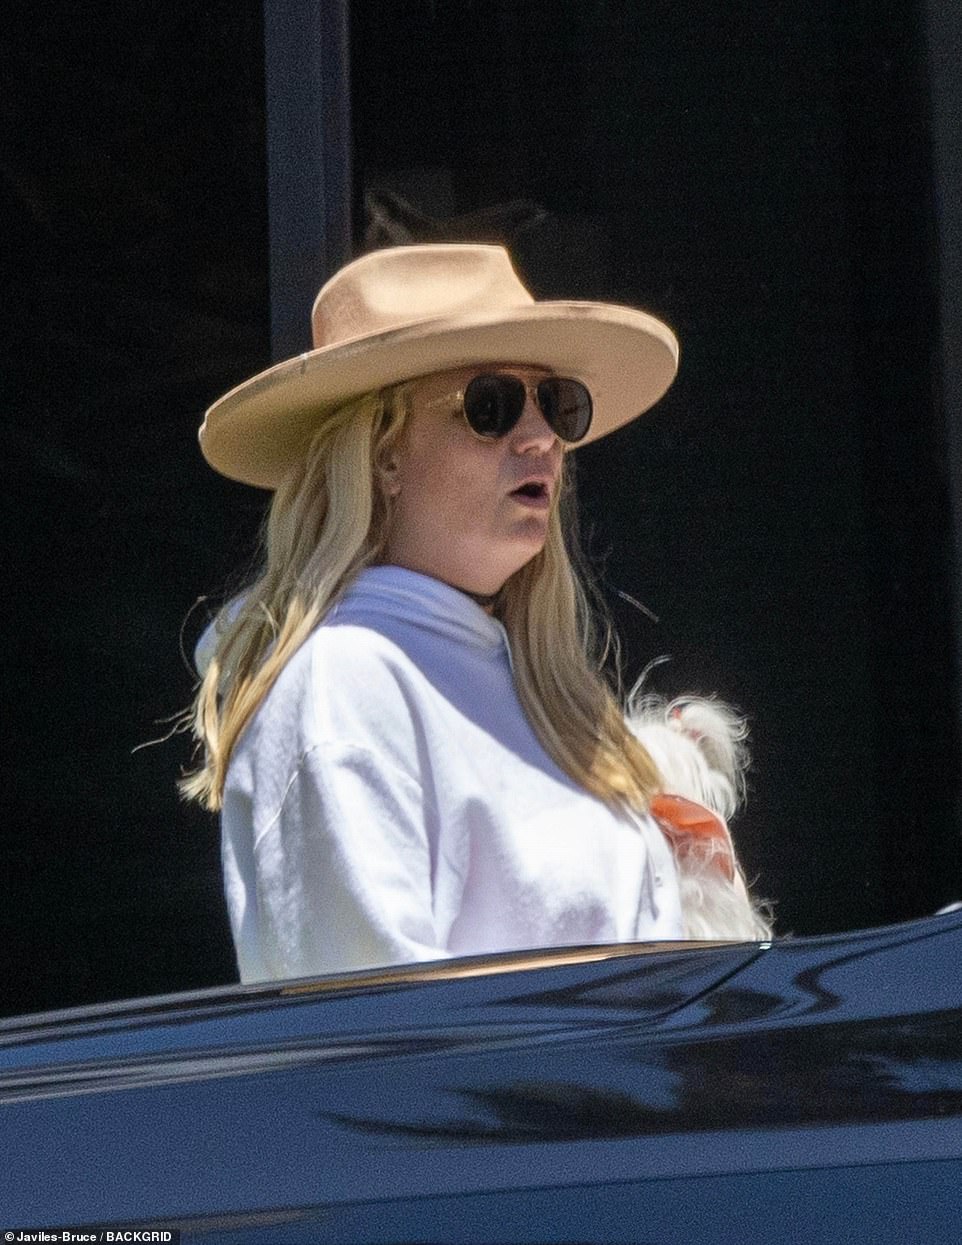 The source indicated that Britney had seen Sean and Jayden at their Hawaii home several times this year, and it was a natural fit since Britney has vacationed in the island state going back years. In addition to seeing Sean and Jayden at their home, the source added that the boys also visited Britney at her home during trips back to California.